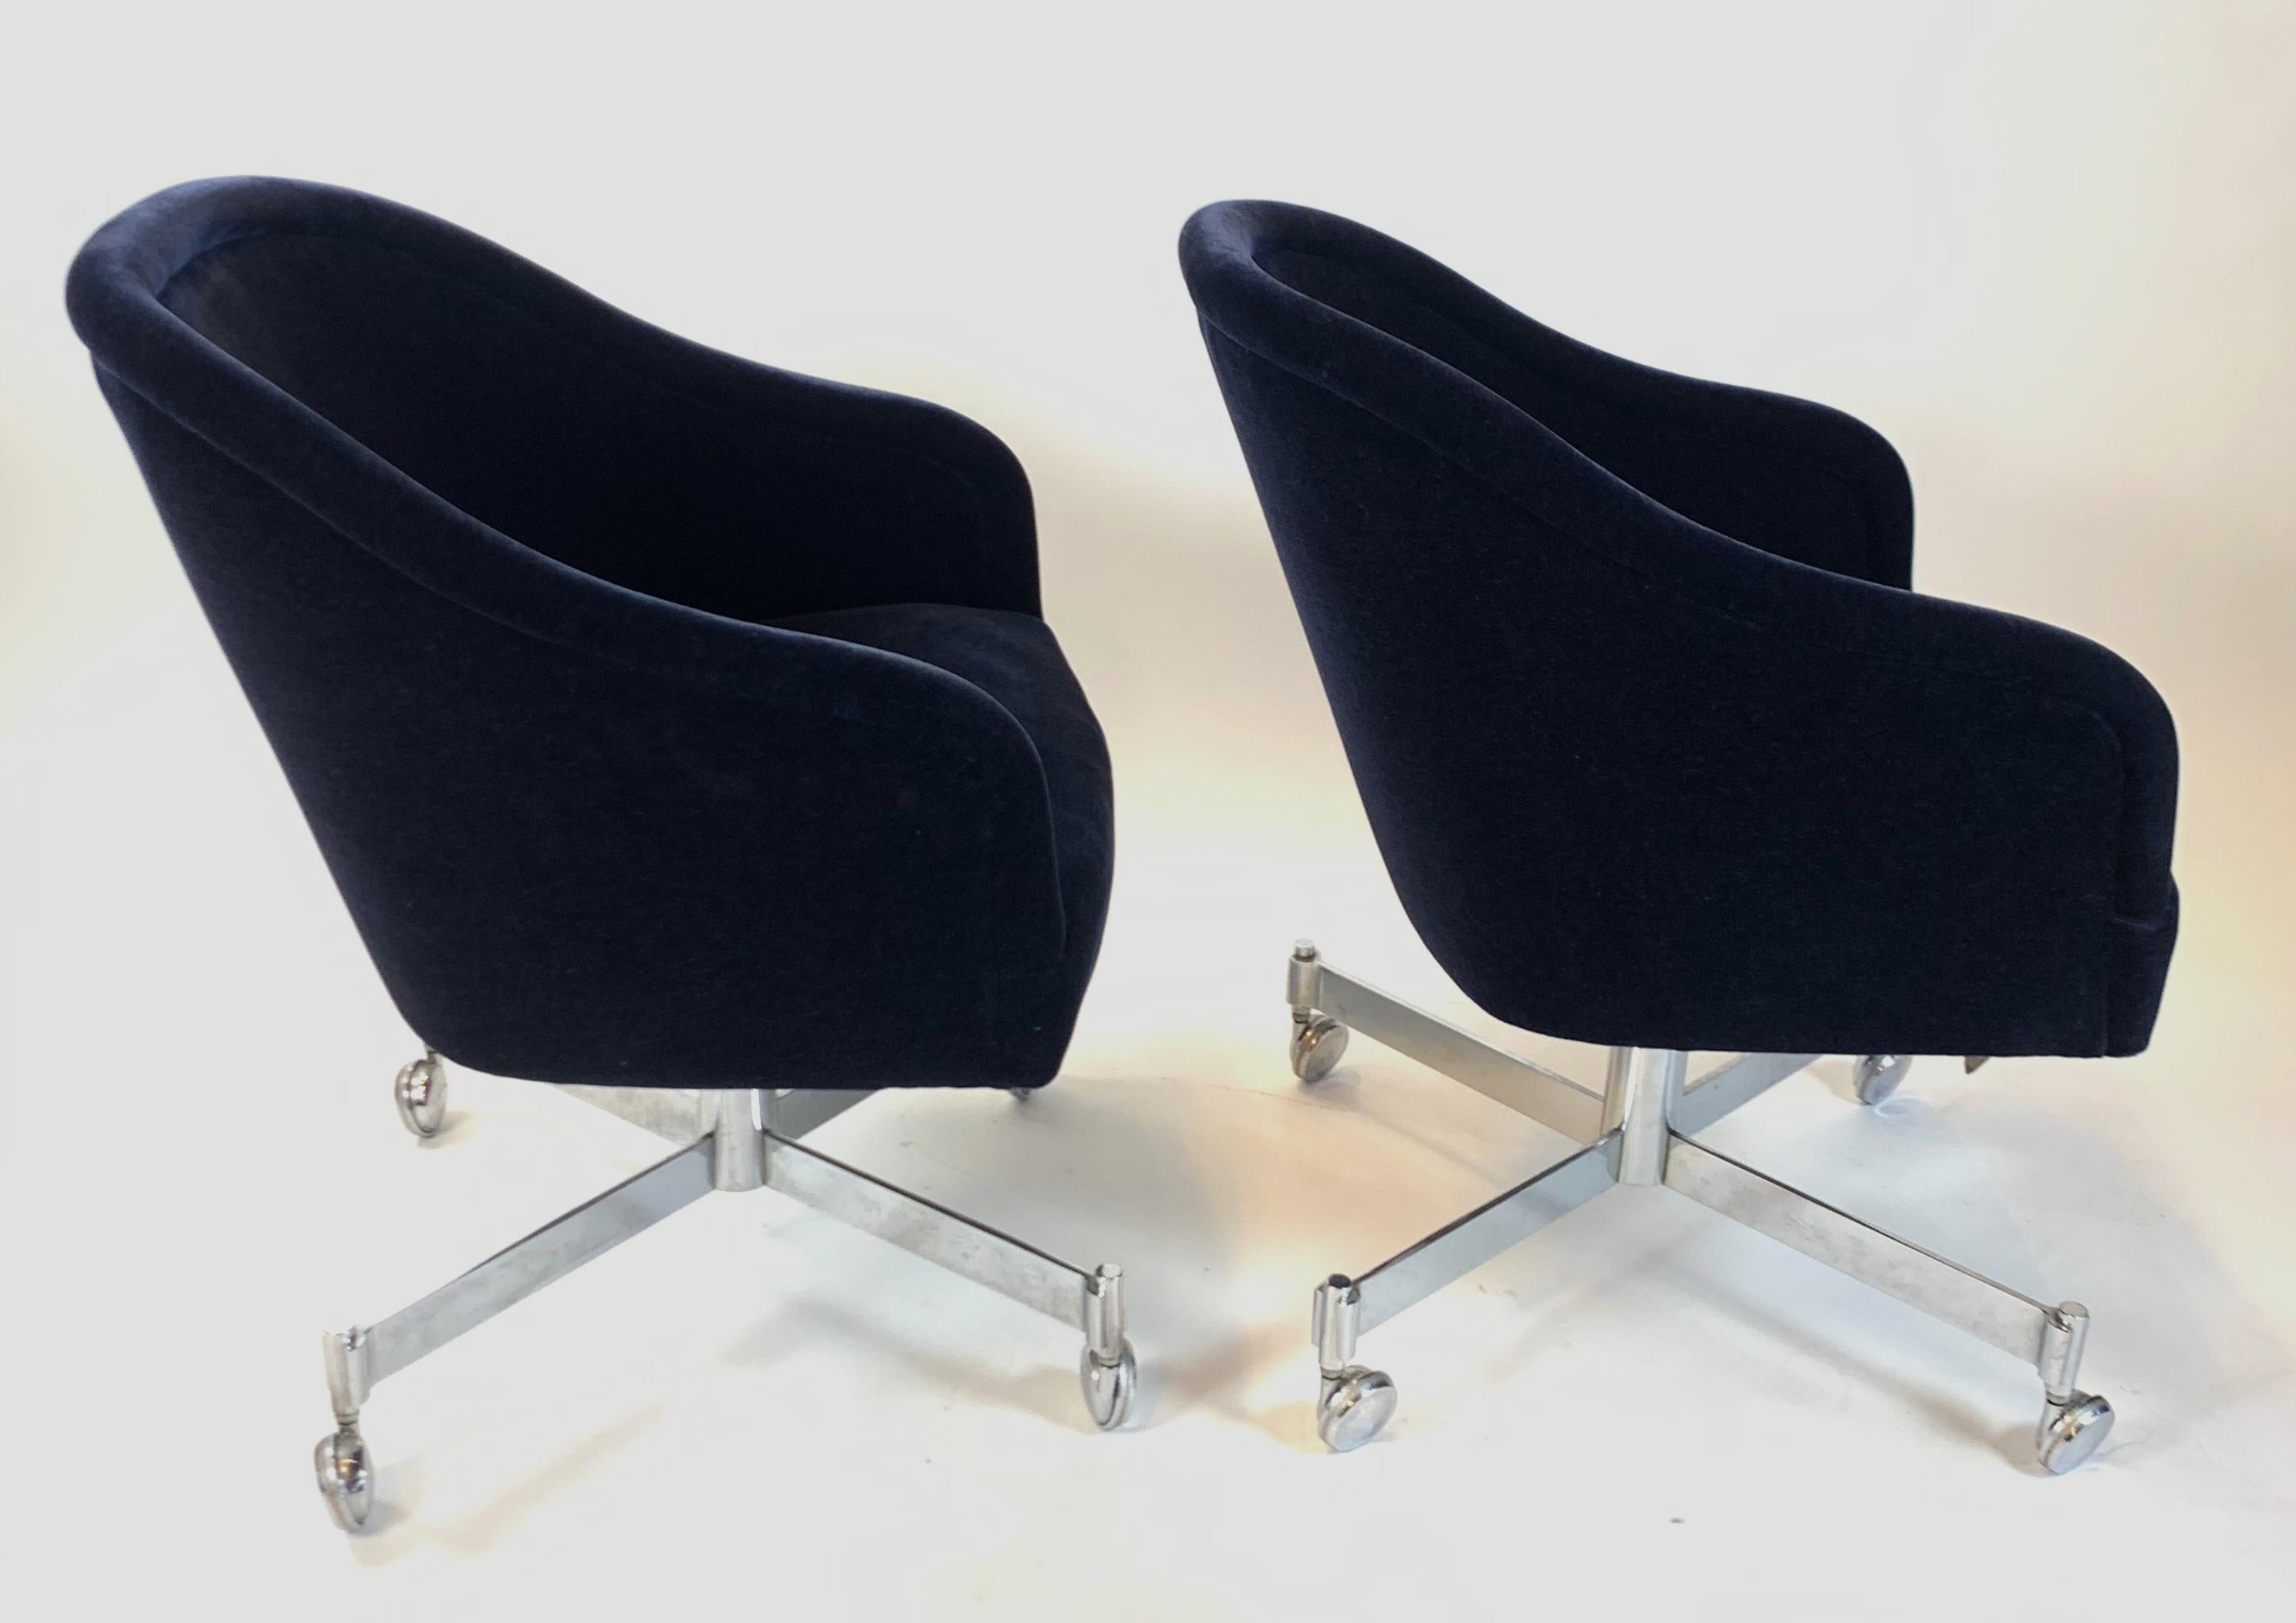 Stunning reclining Executive swivel chair by Ward Bennett for Brickel. The chair is in beautiful original condition. The chrome base and slimline casters are also in excellent condition. The chair also tilts and is height adjustable.